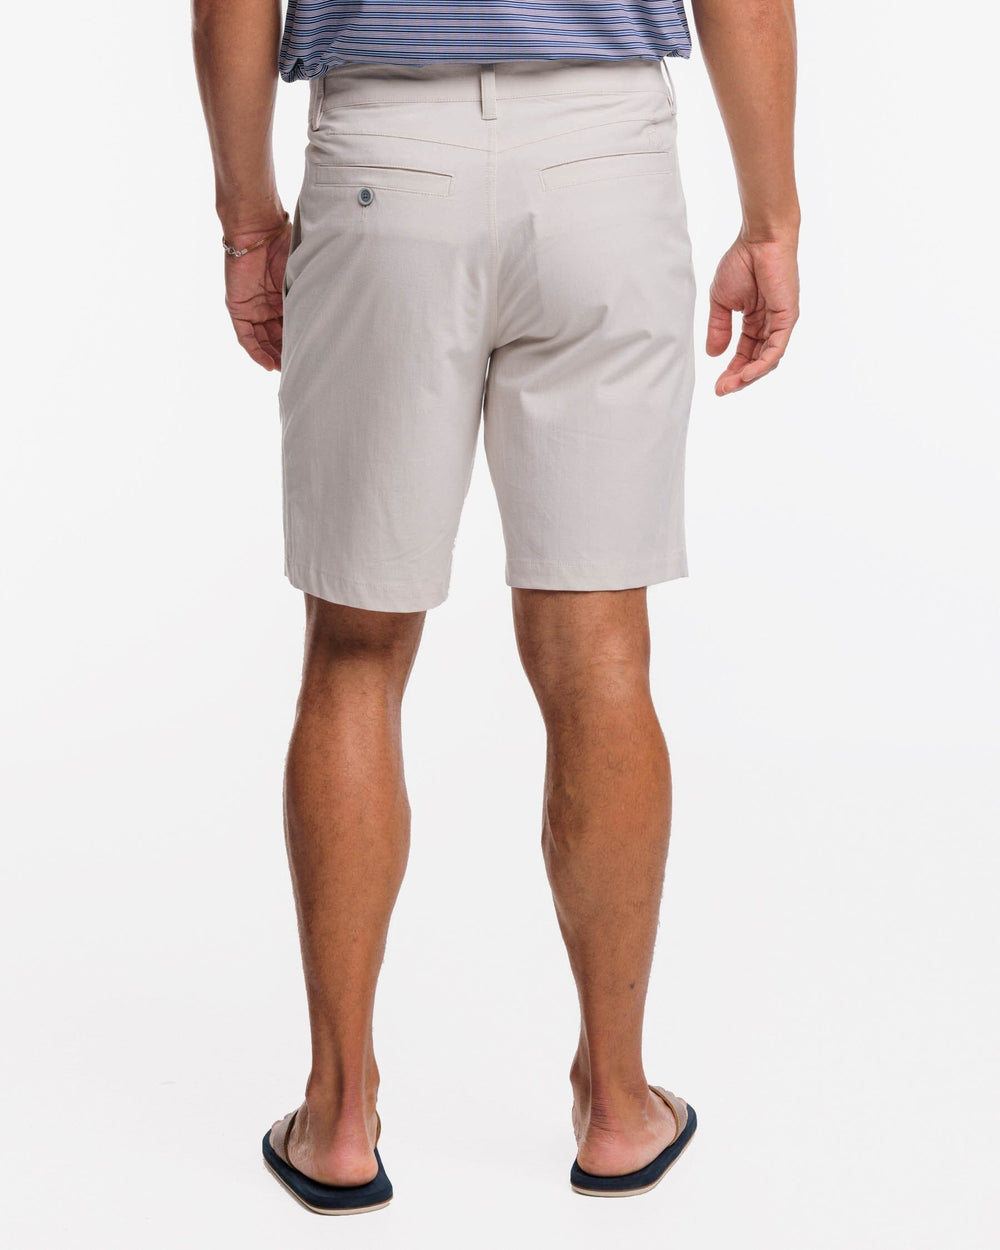 The back view of the Southern Tide T3 Gulf 9 Inch Performance Short by Southern Tide - Stone